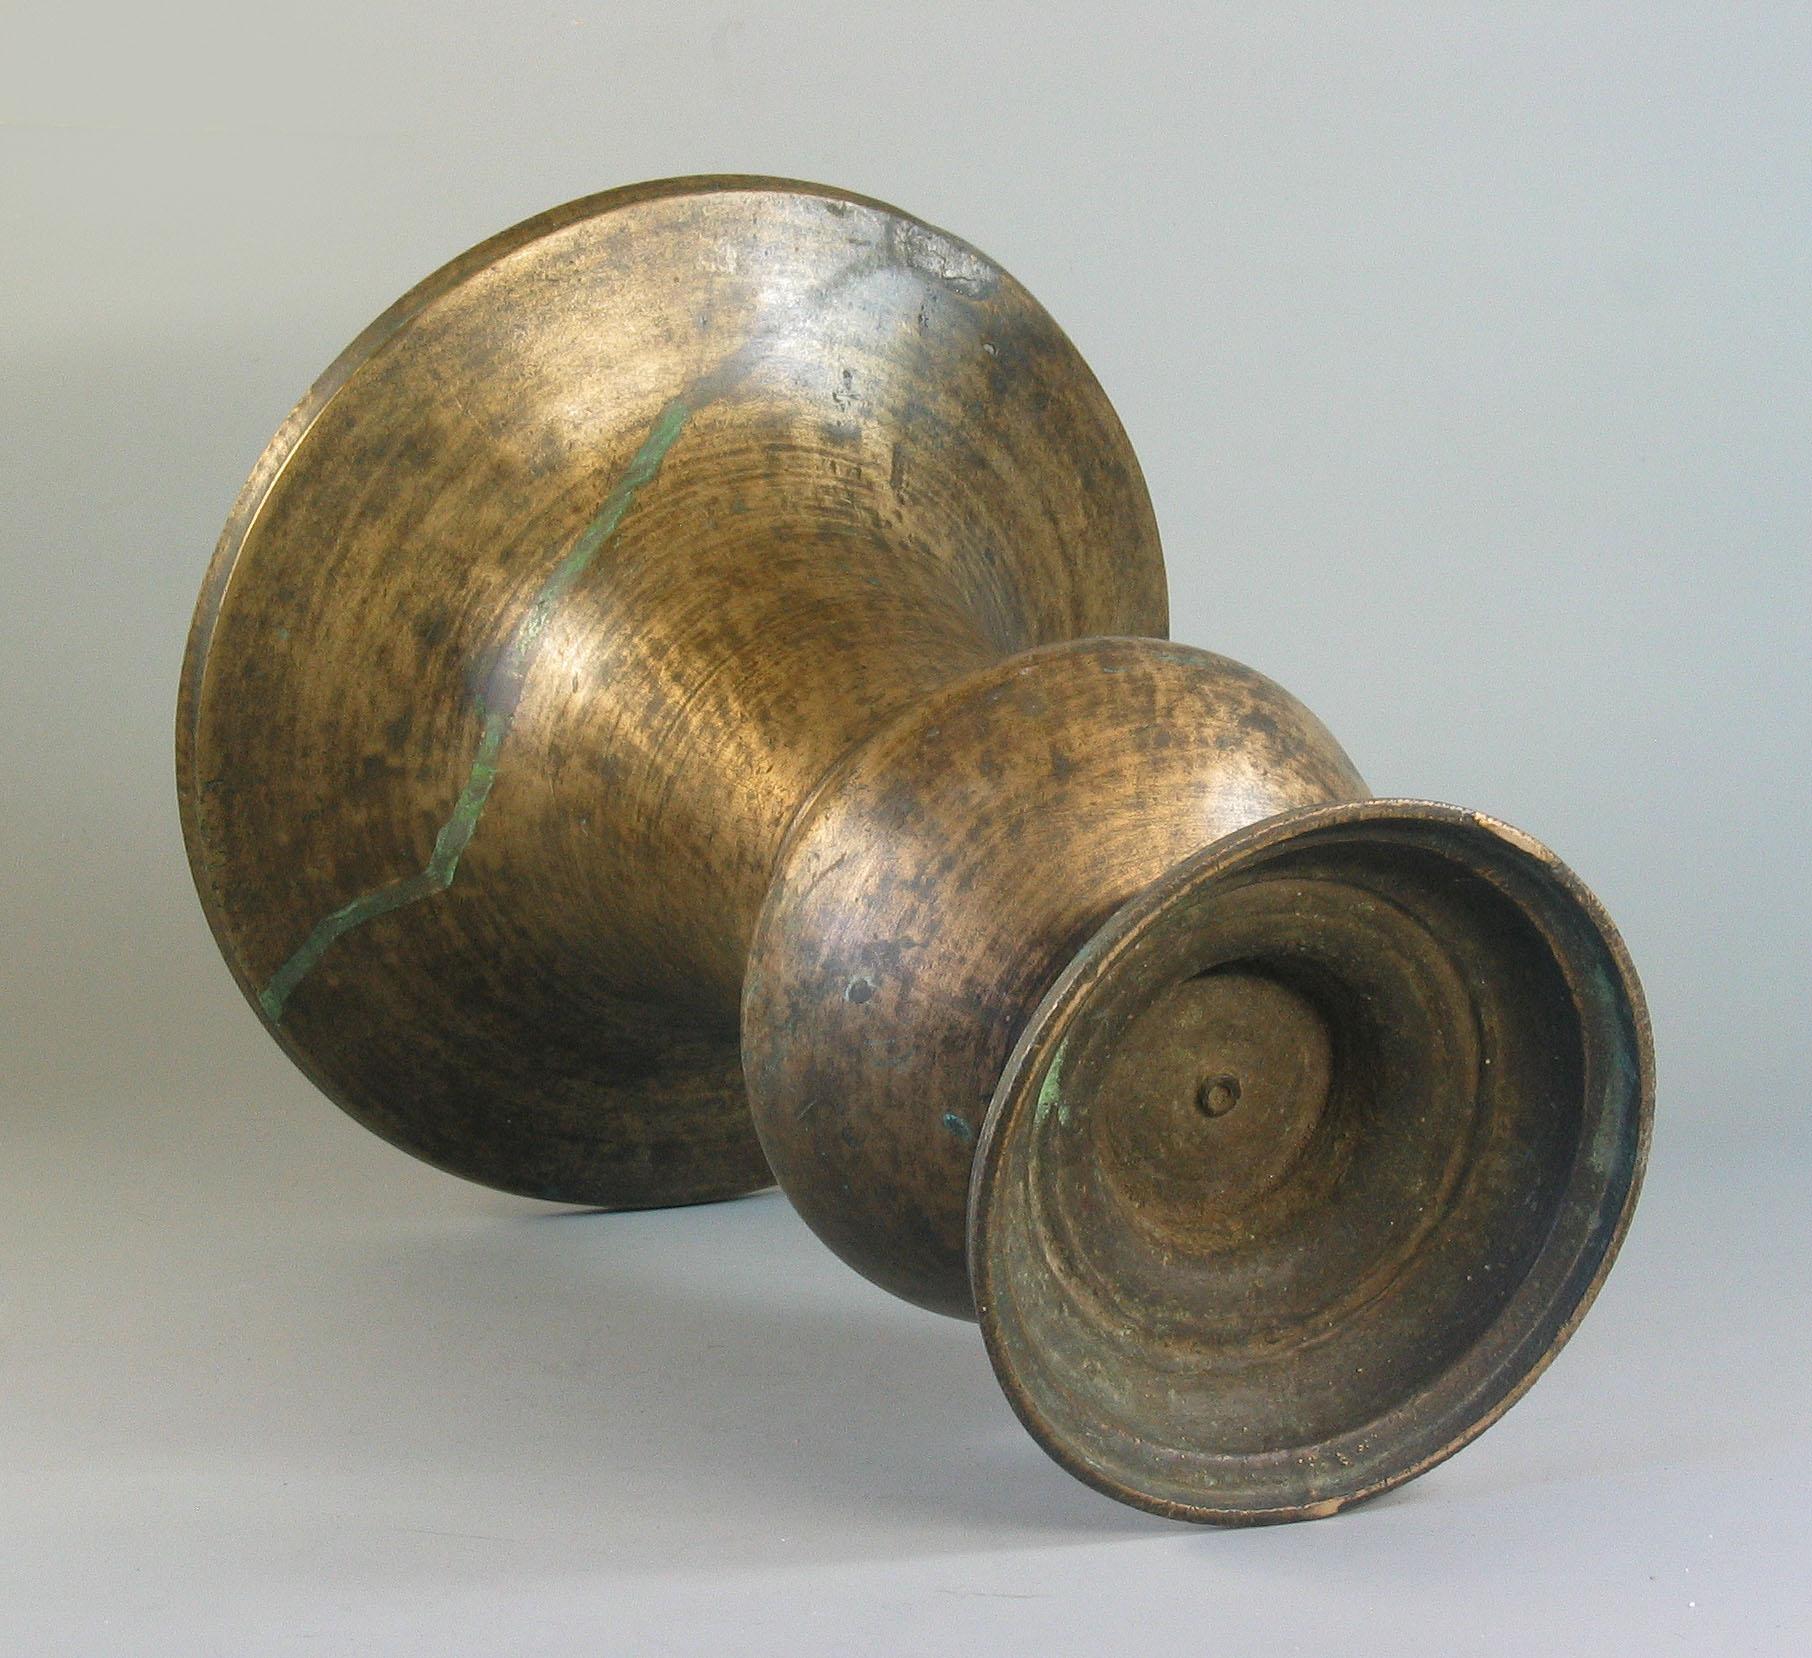 Hand-Crafted Brass Betel Nut Box & Cover together with Spitton and Brass Betel Nut Set